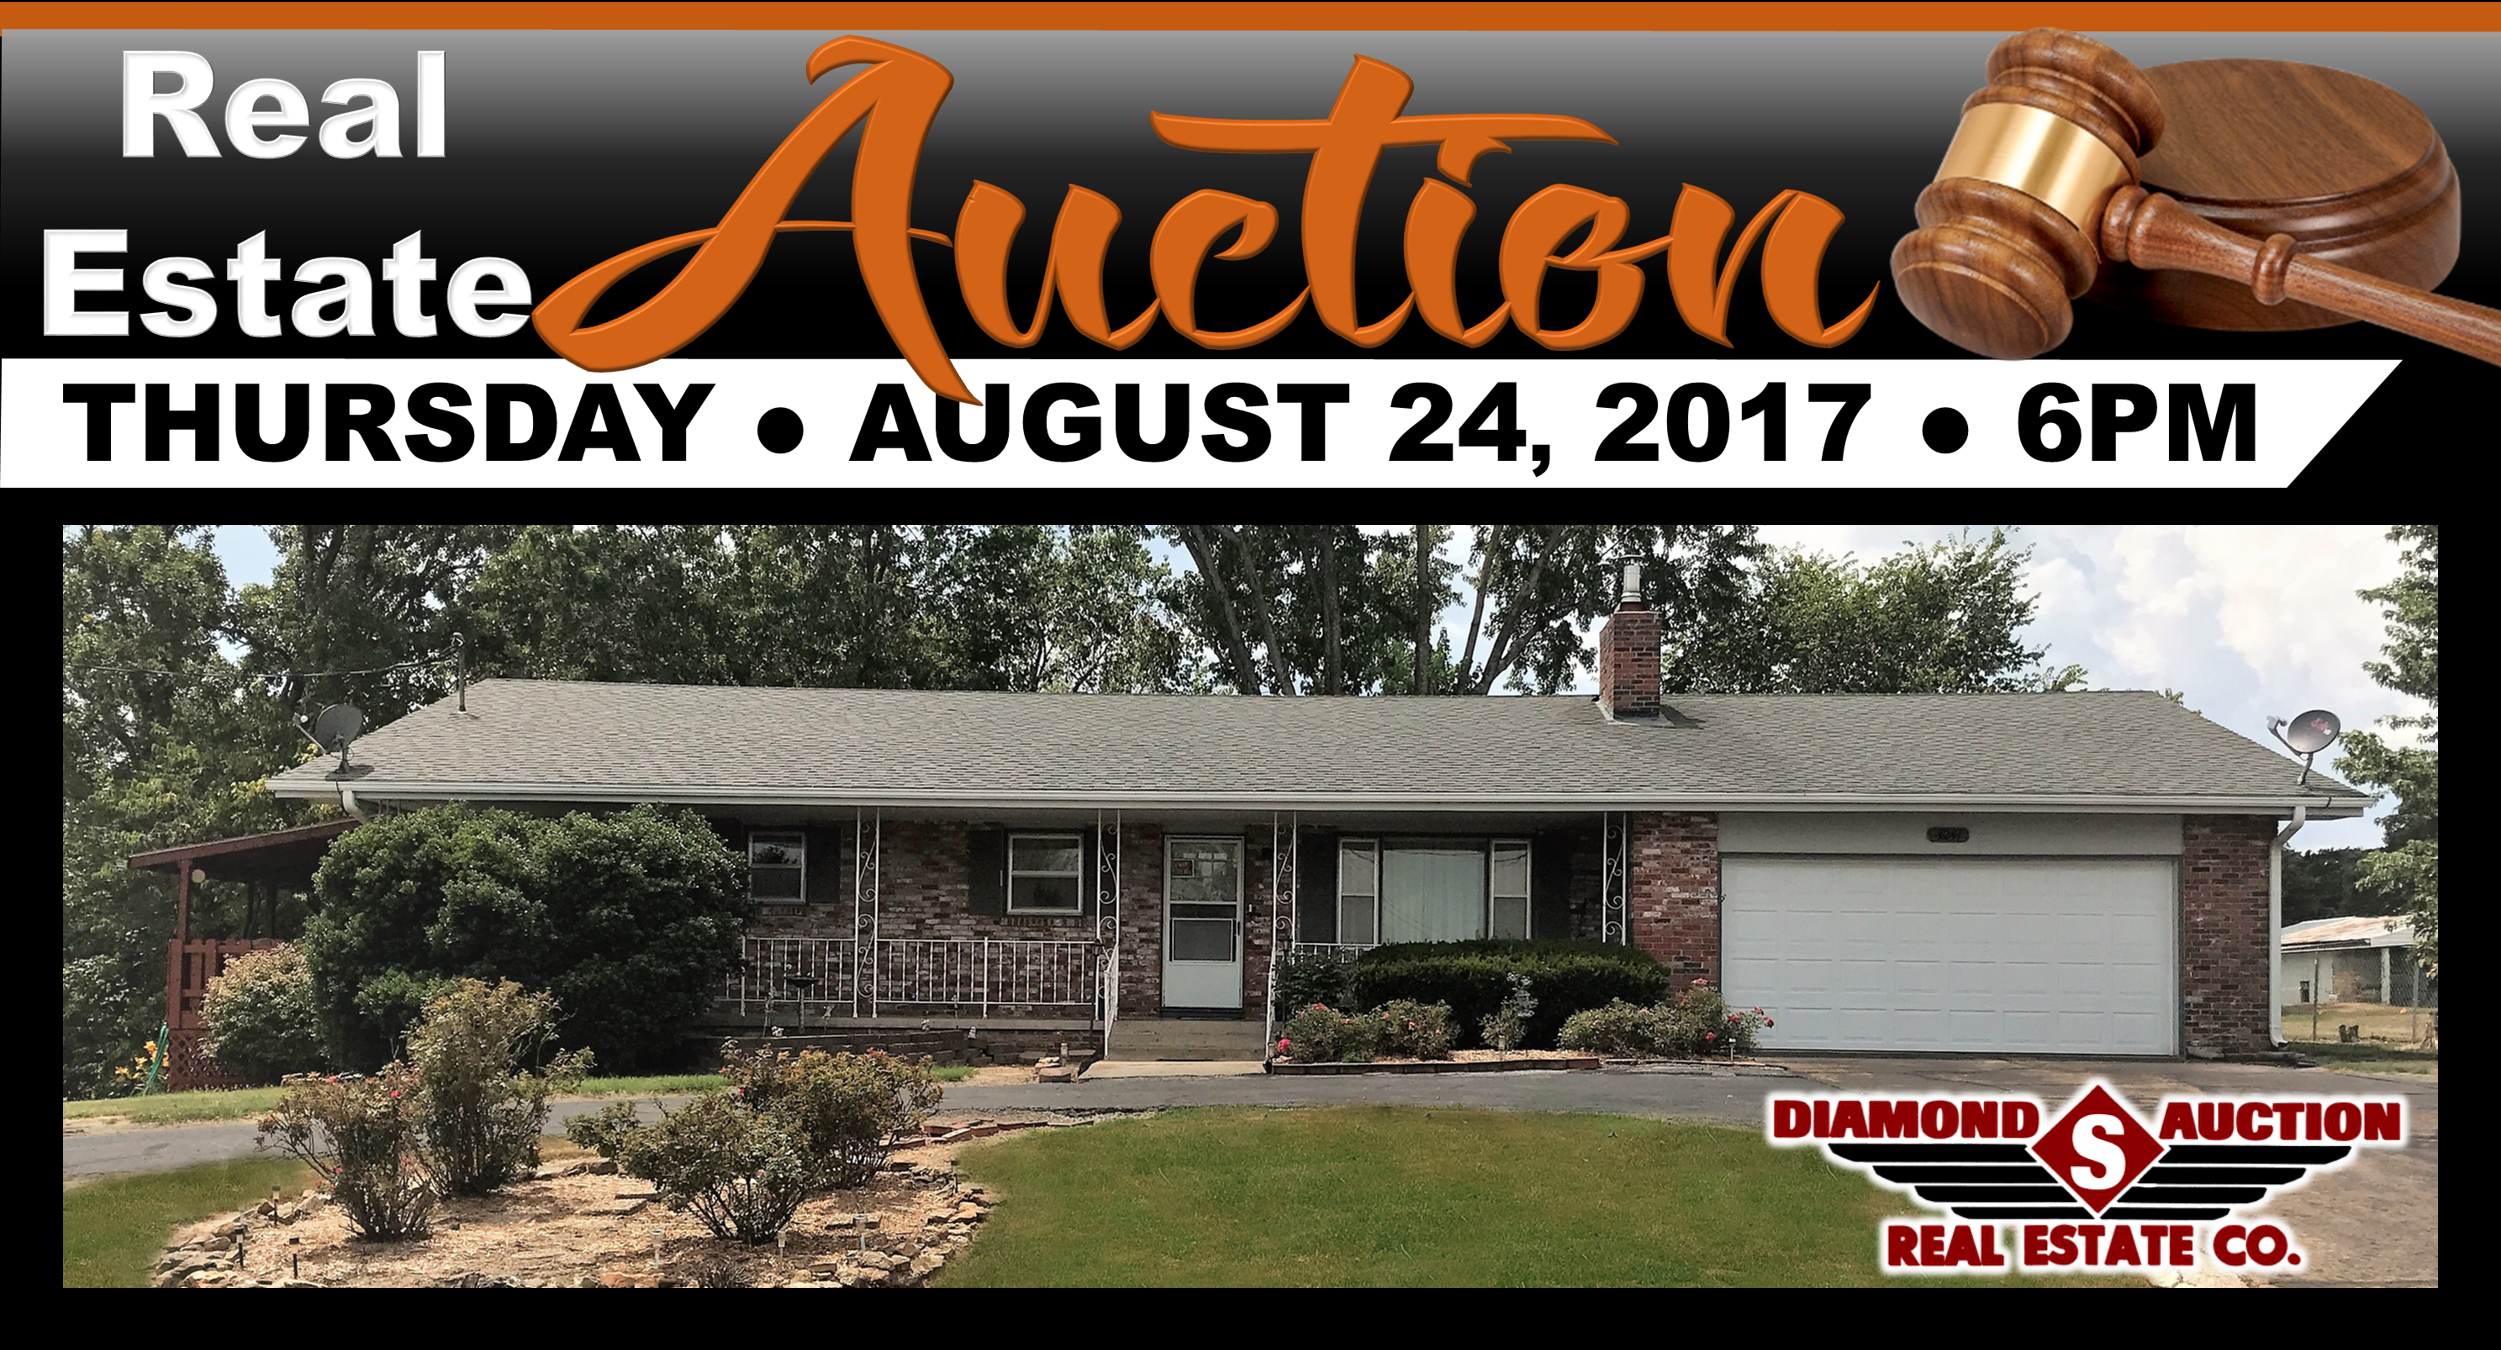 REAL ESTATE AUCTION